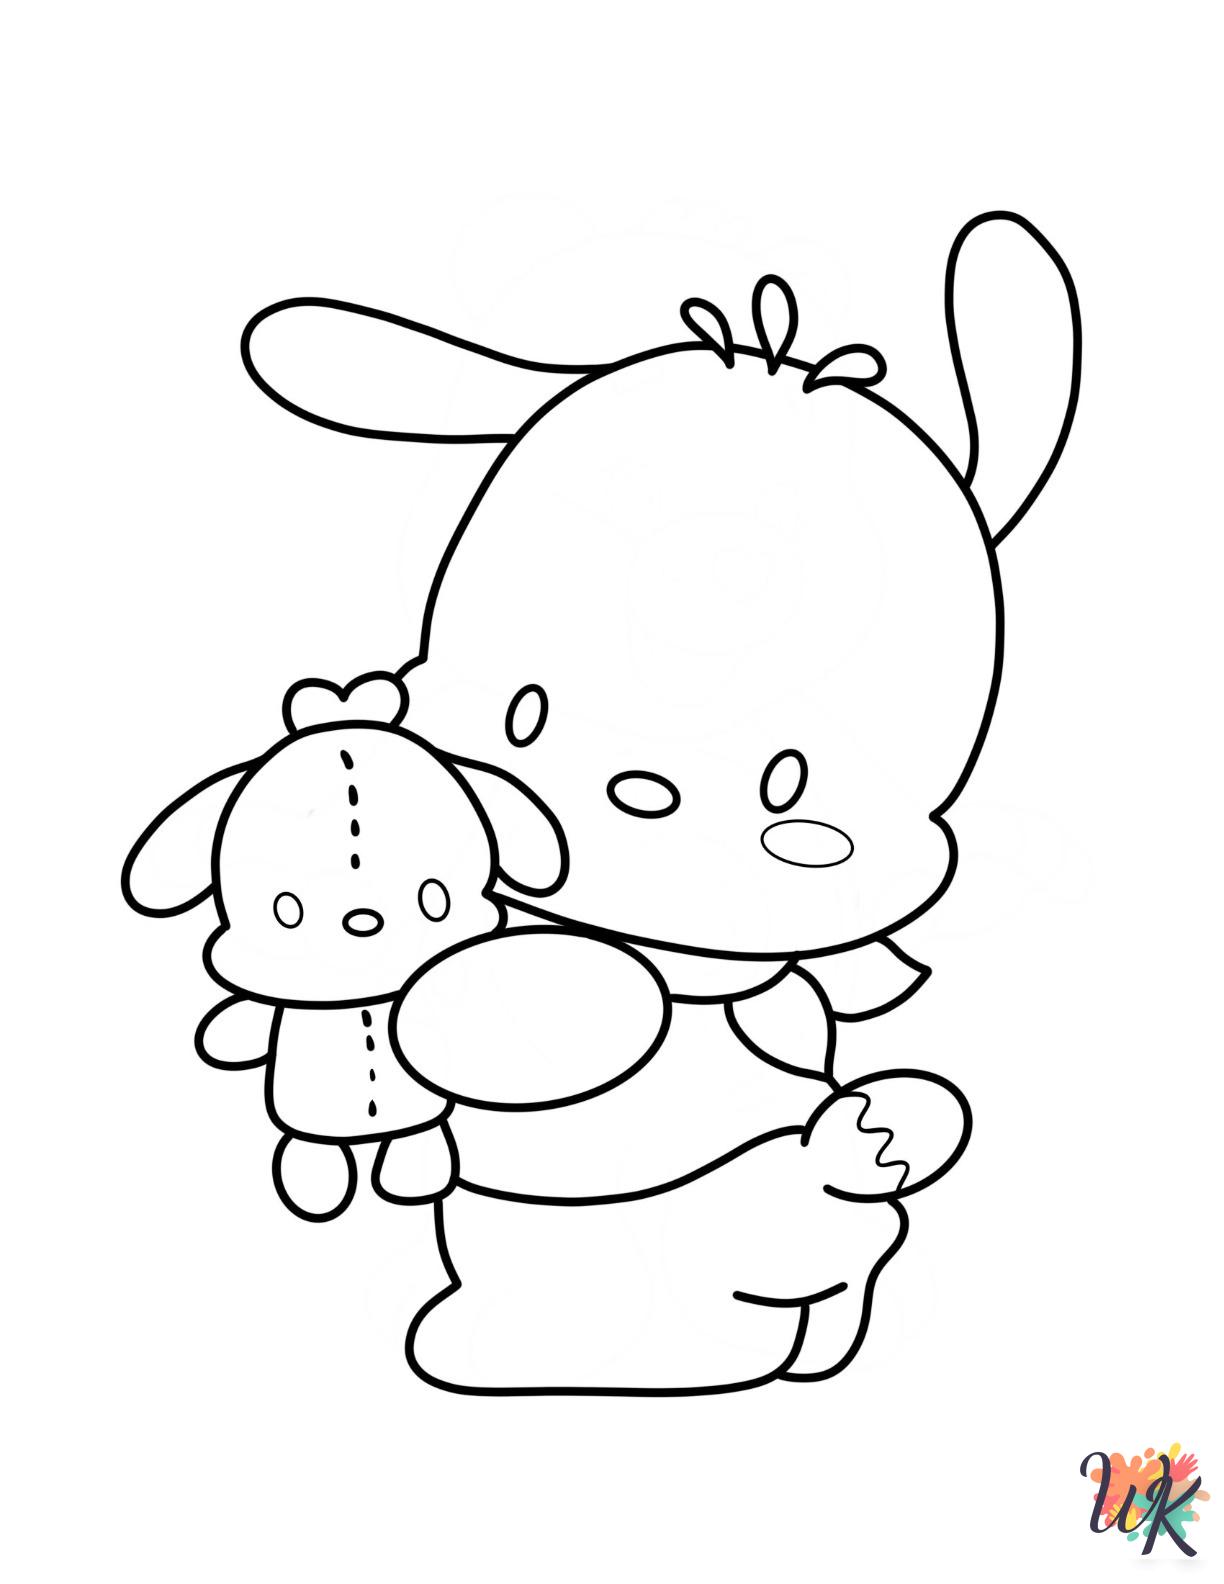 Pochacco coloring pages for adults pdf